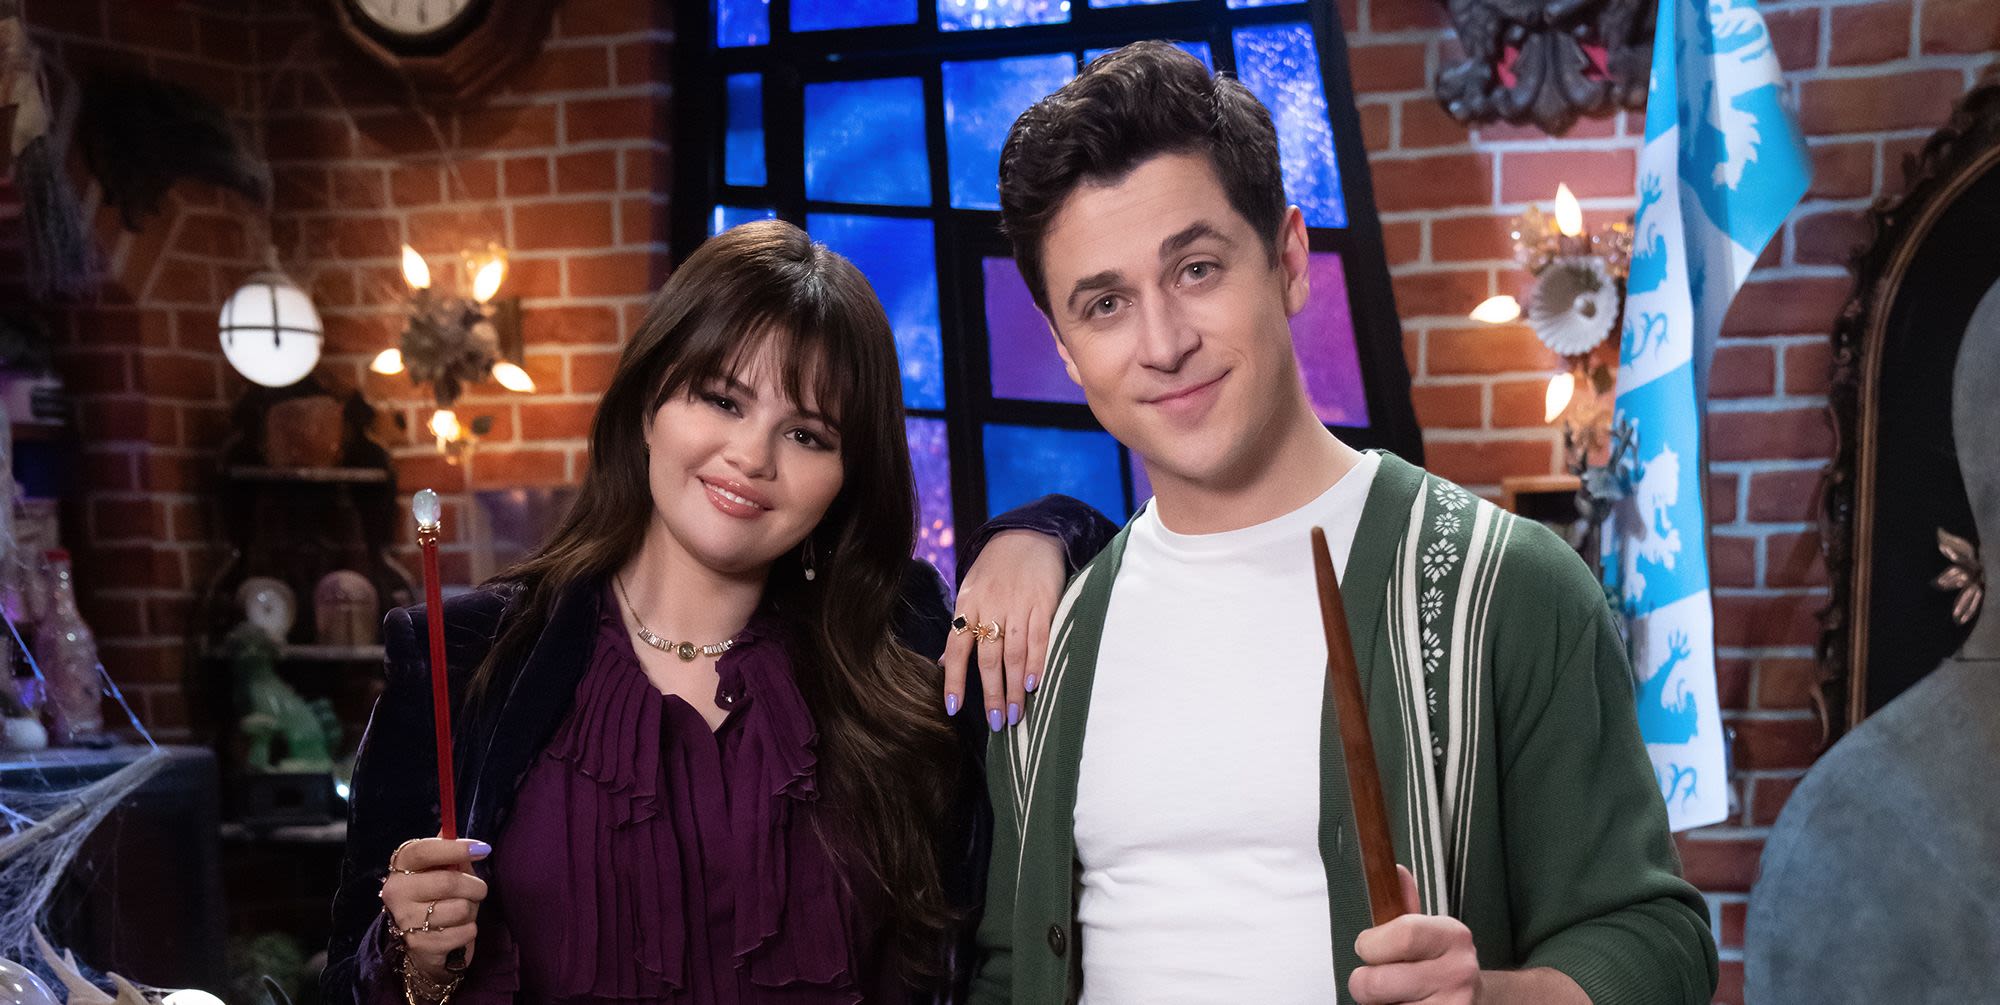 Wizards of Waverly Place reboot title confirmed with new look pics